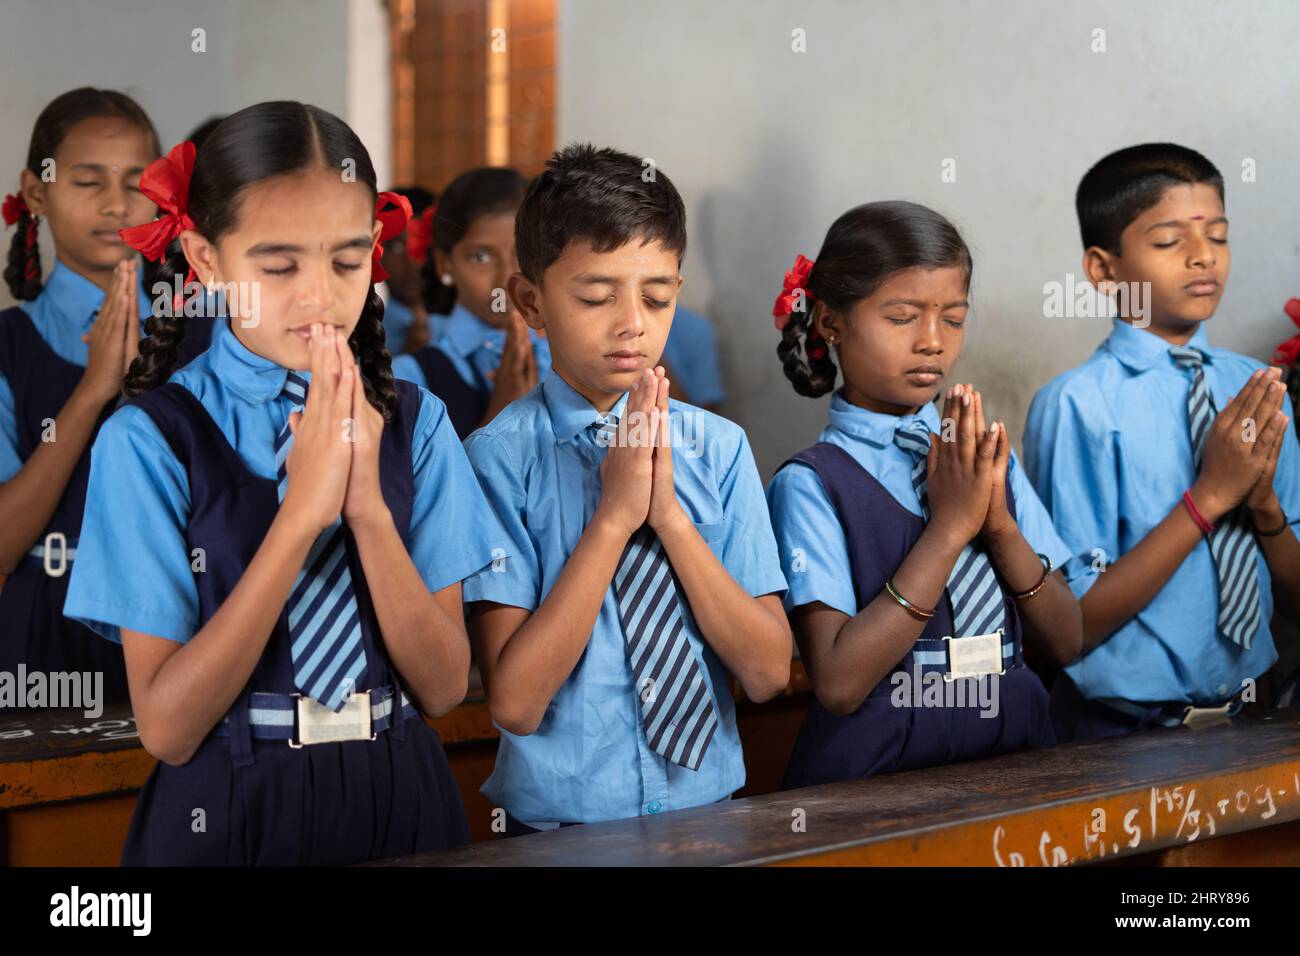 Students at classroom doing morning prayer with closed eyes - concept of wisdom, friendship, development and discipline. Stock Photo